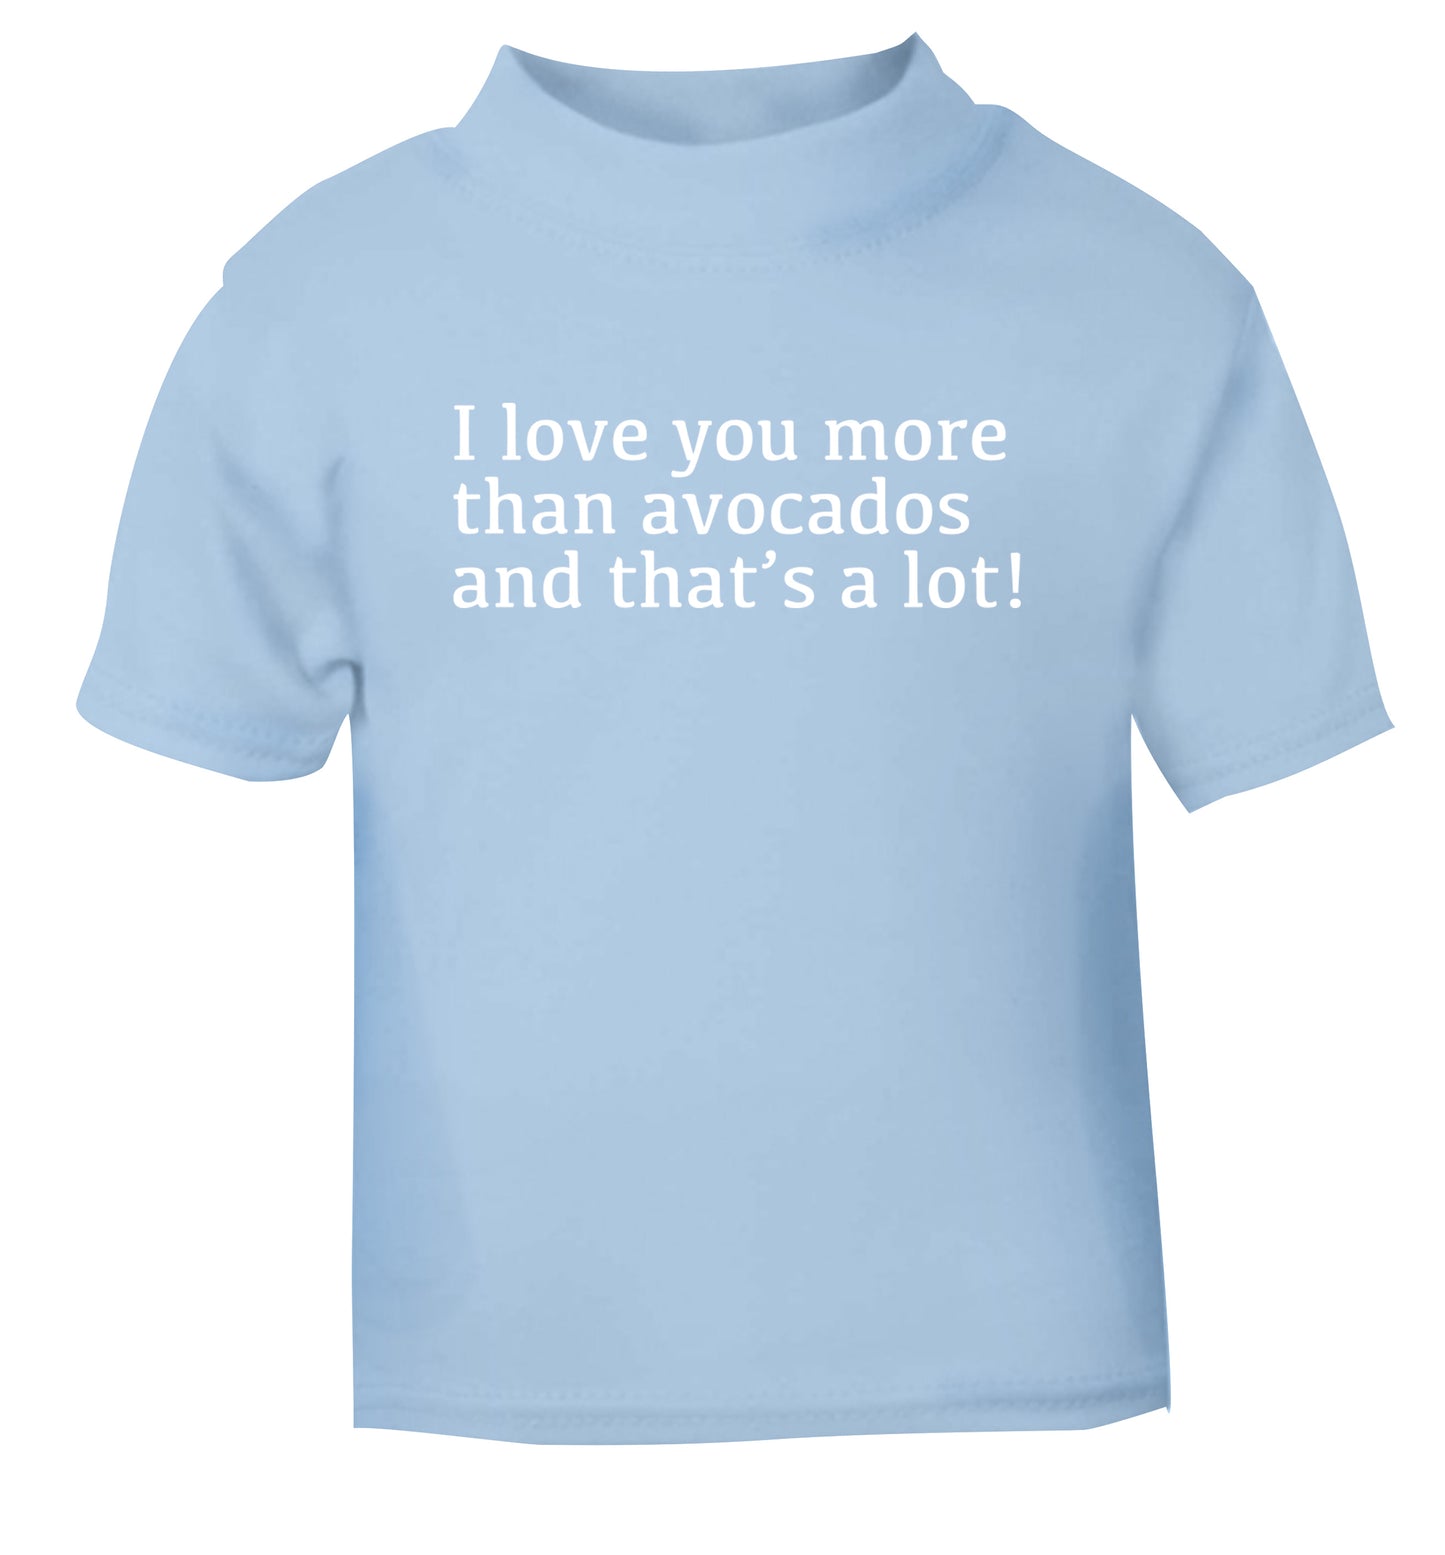 I love you more than avocados and that's a lot light blue Baby Toddler Tshirt 2 Years